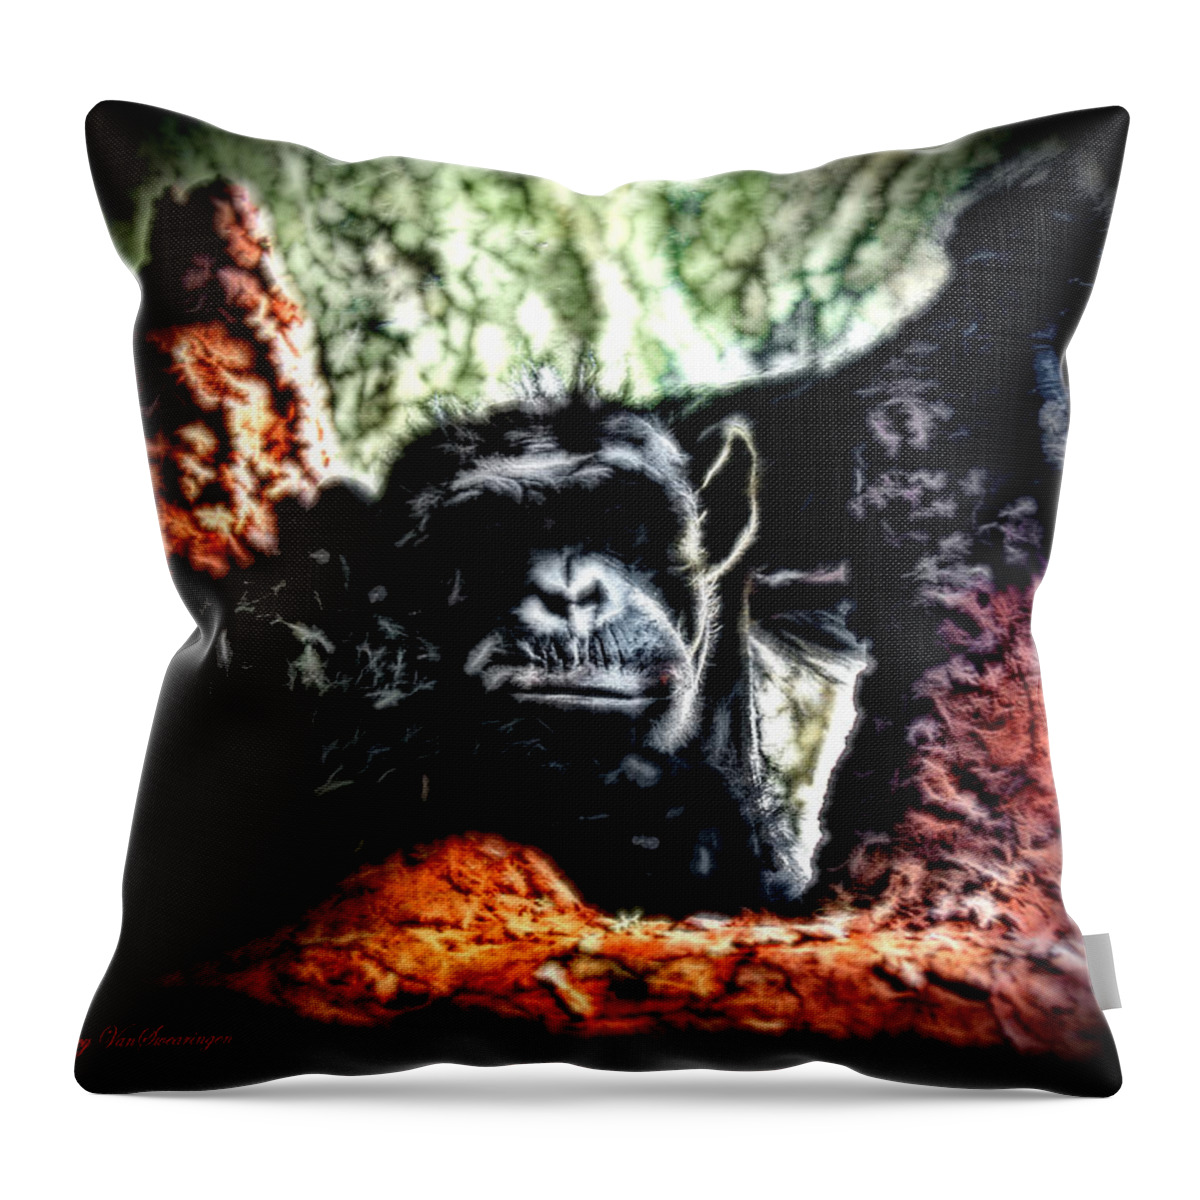 Zoo Throw Pillow featuring the photograph The Thinker by Lucy VanSwearingen